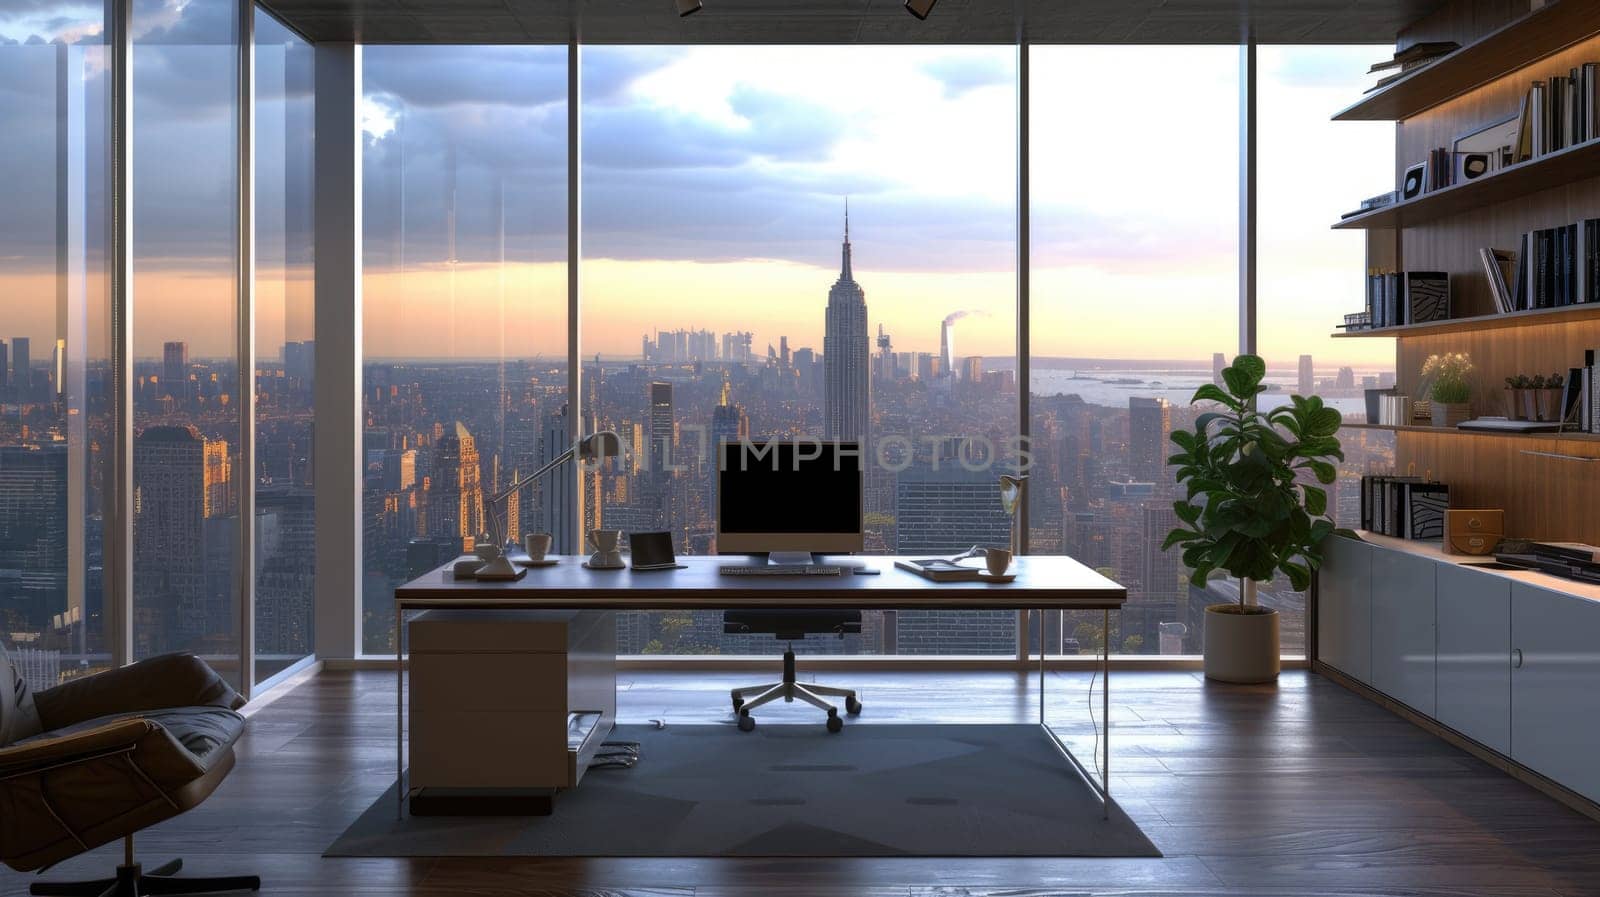 Luxurious Home Office with Cityscape View. Resplendent. by biancoblue